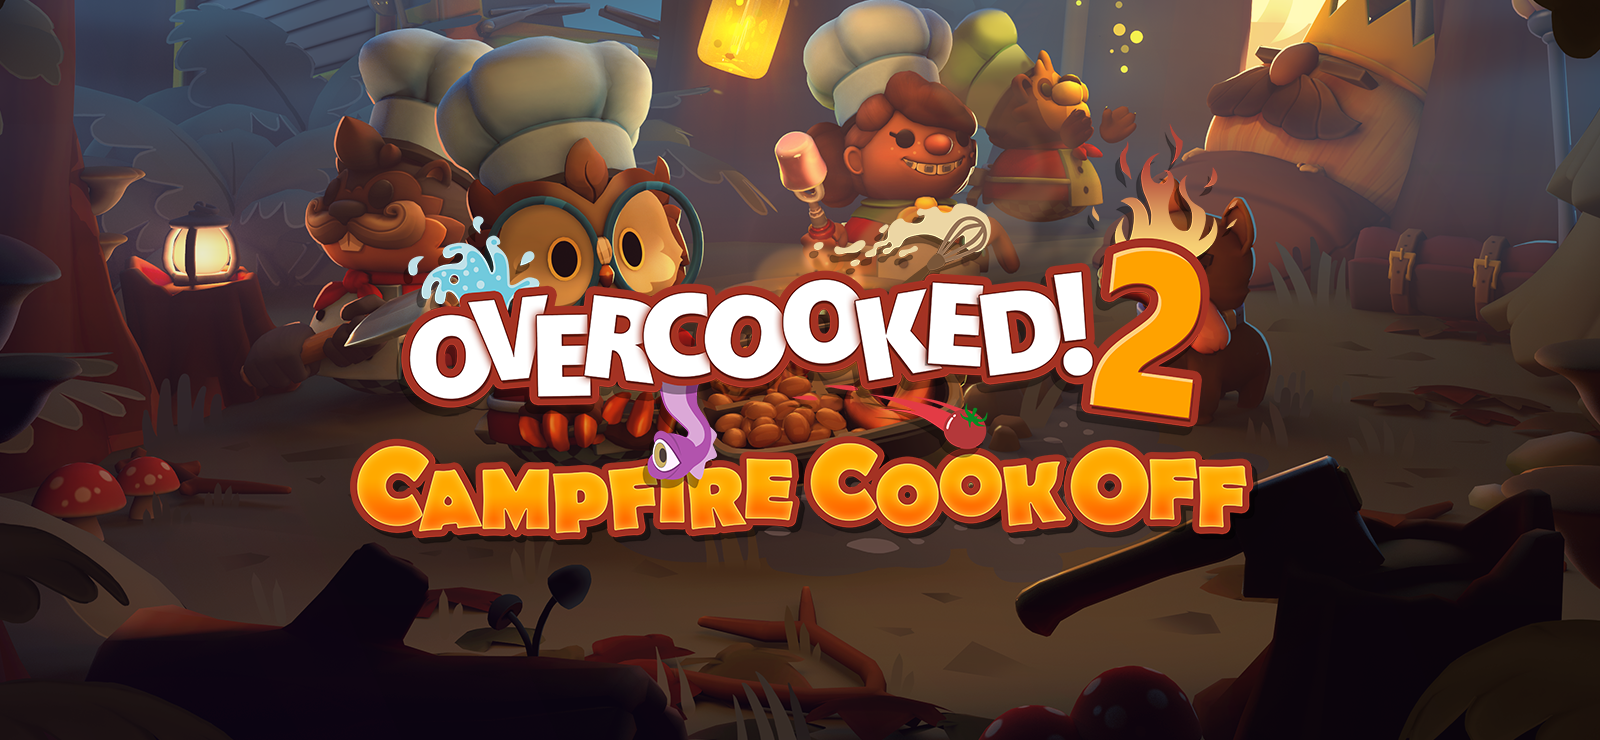 Overcooked! 2 - Campfire Cook Off!